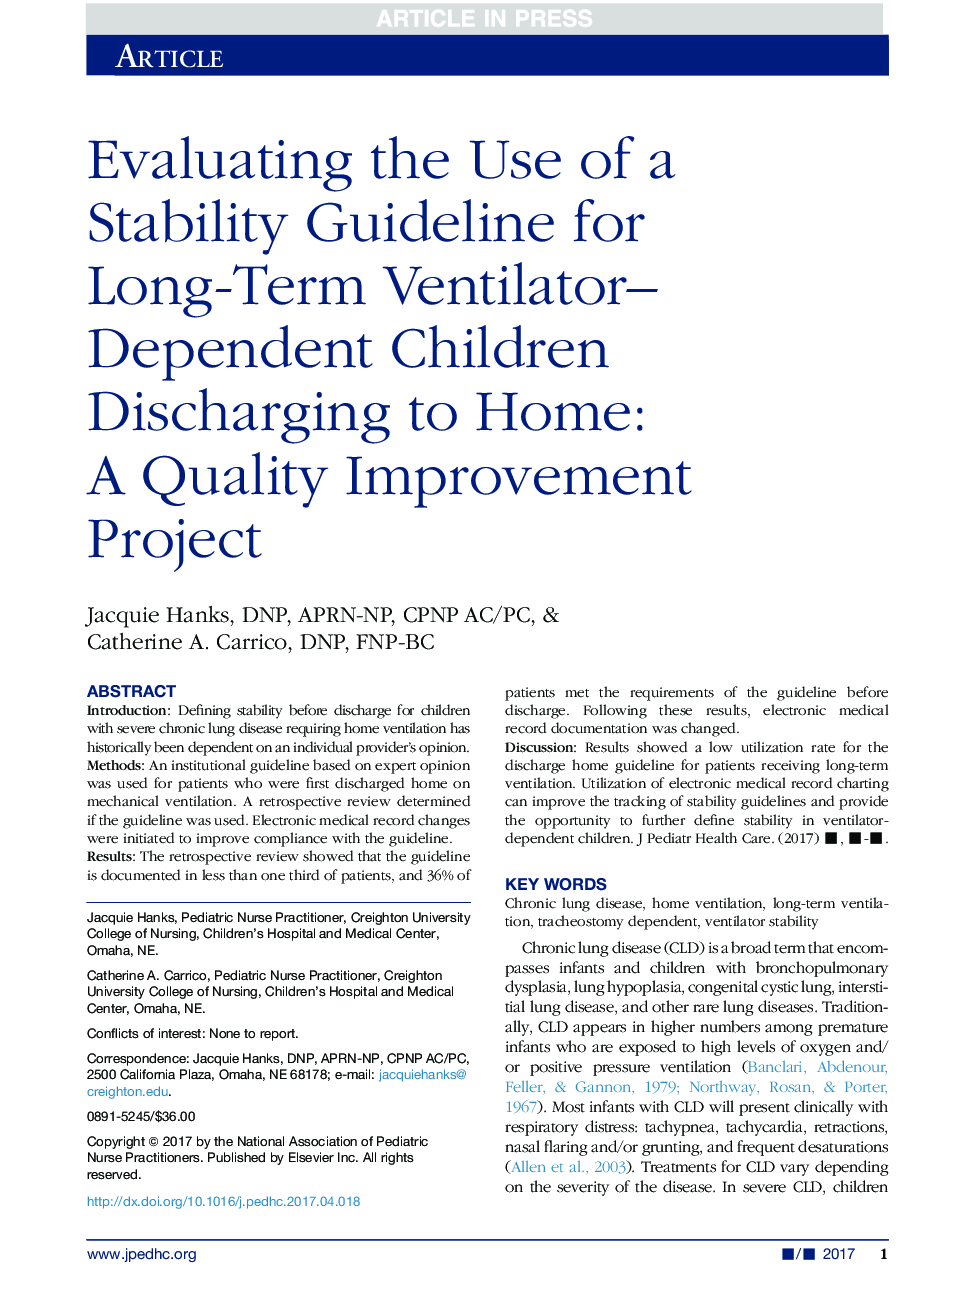 Evaluating the Use of a Stability Guideline for Long-Term Ventilator-Dependent Children Discharging to Home: AÂ Quality Improvement Project